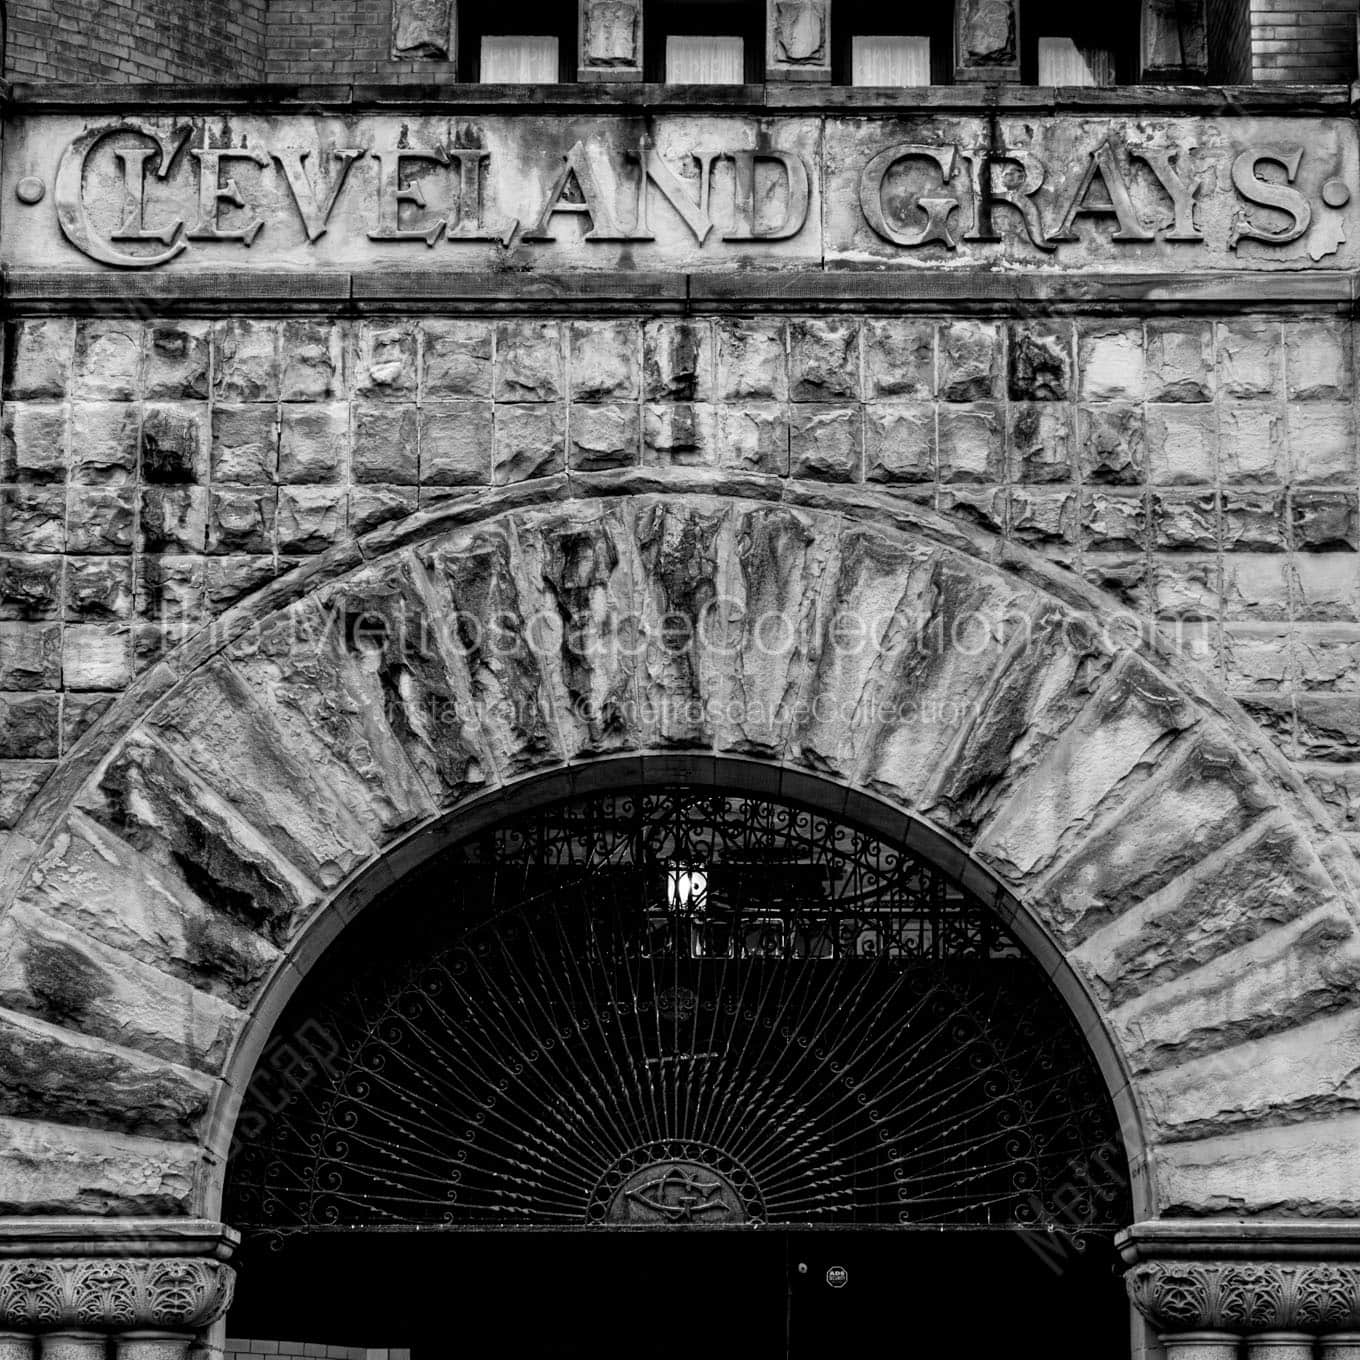 cleveland grays building Black & White Wall Art